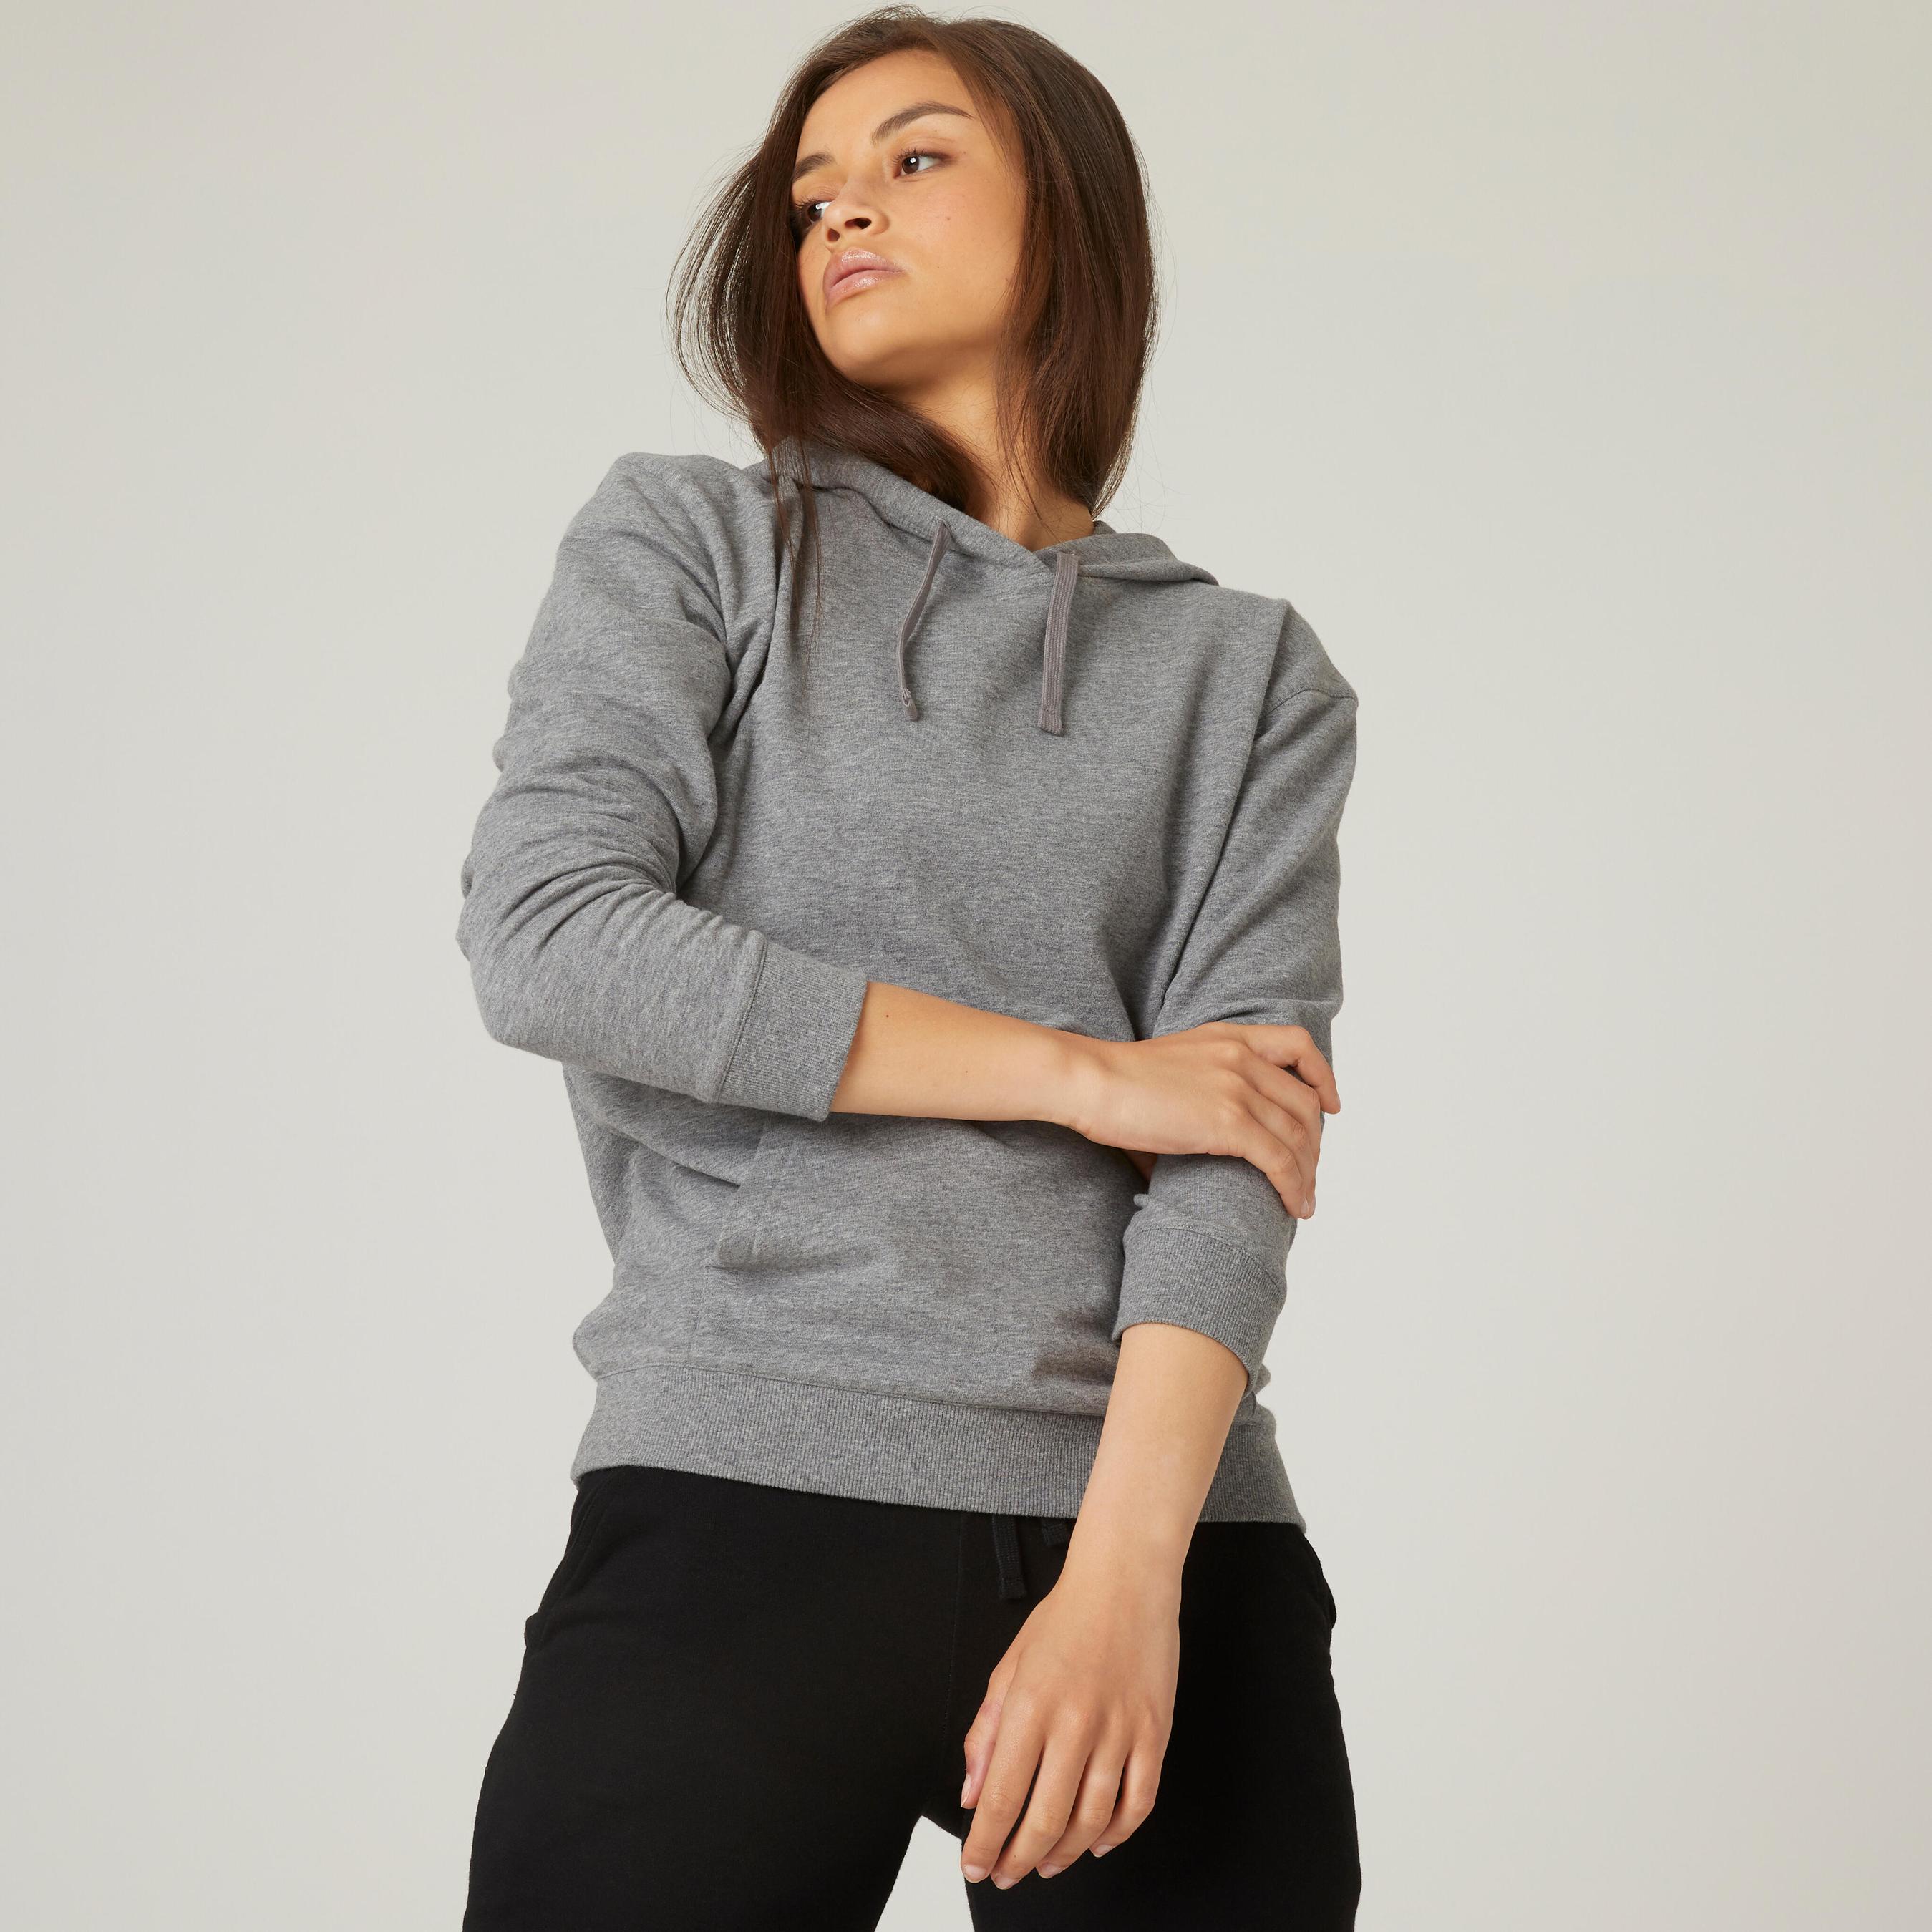 Women's Cotton Hoodie - Grey offers at S$ 14 in Decathlon